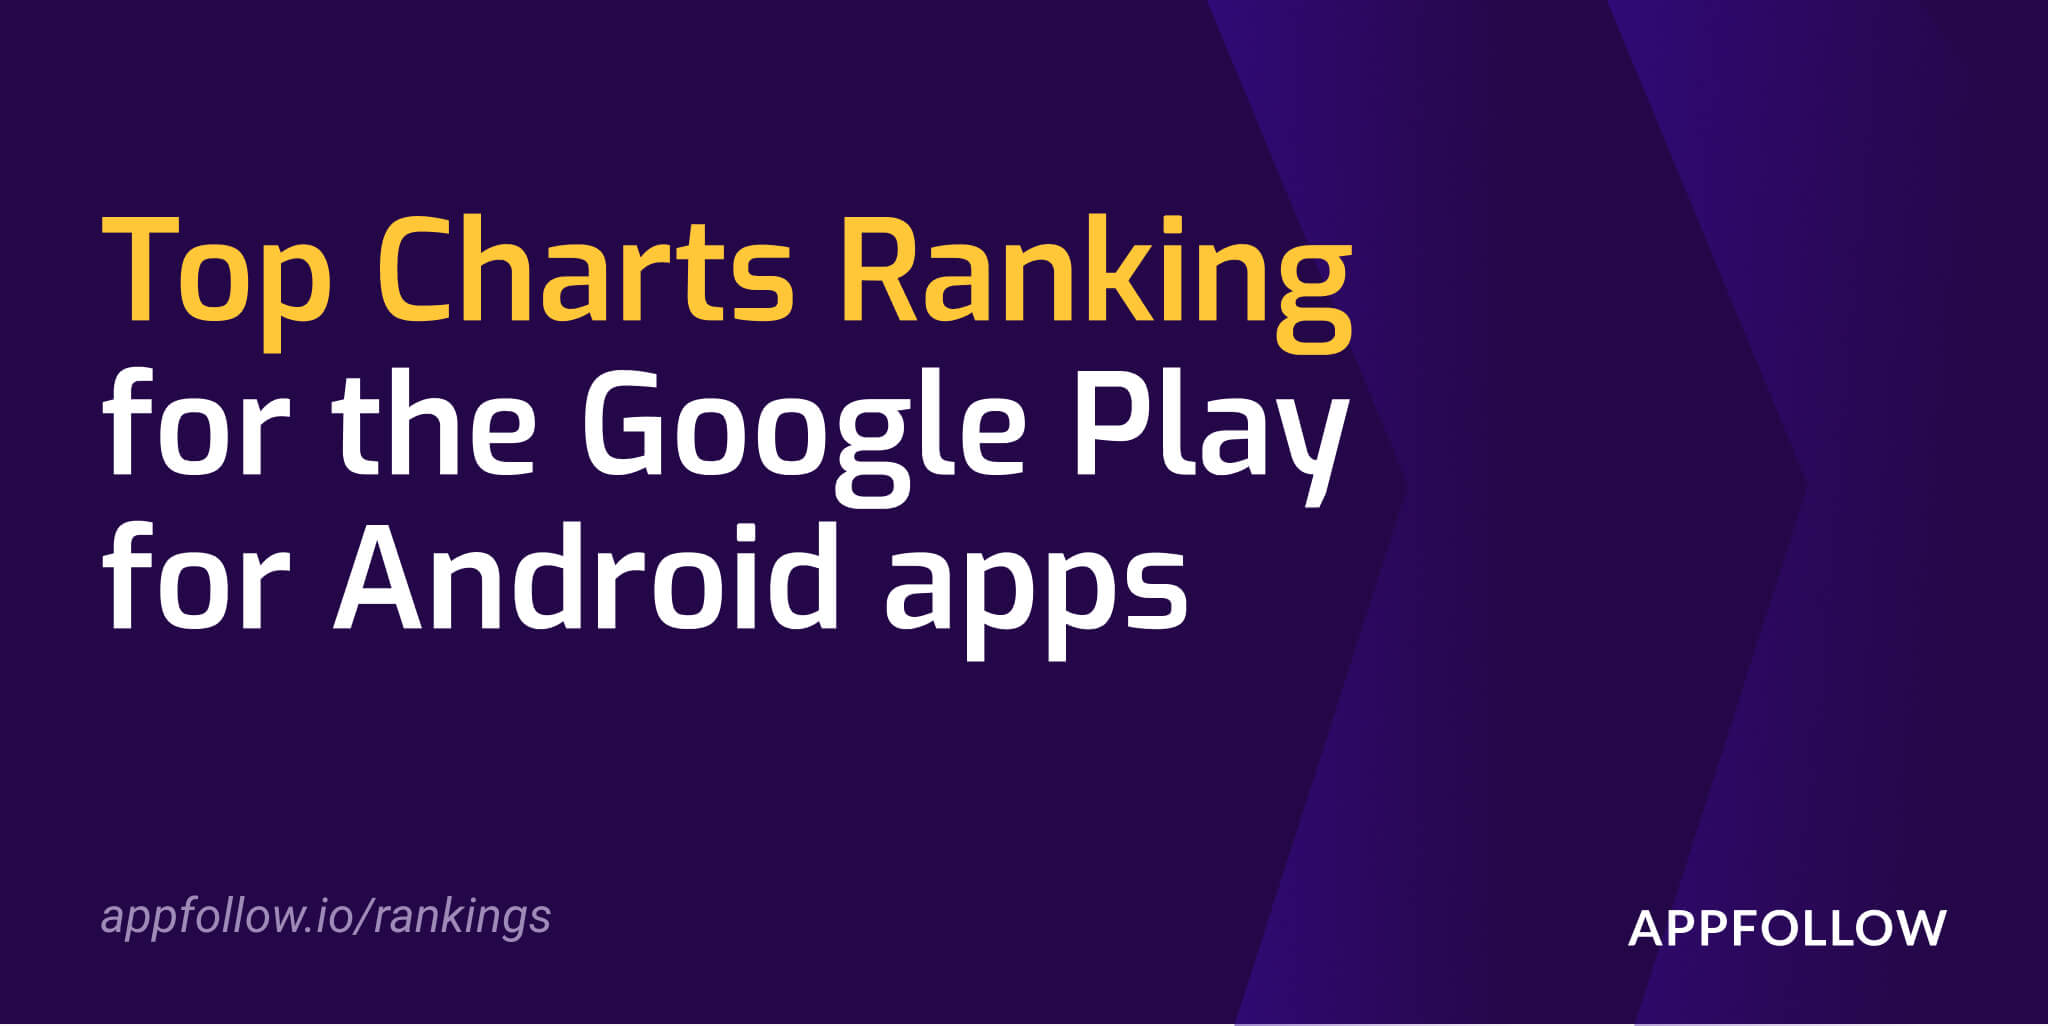 Google Play Top Charts Ranking For Android Apps Appfollow De - john roblox hacker sbux investing com